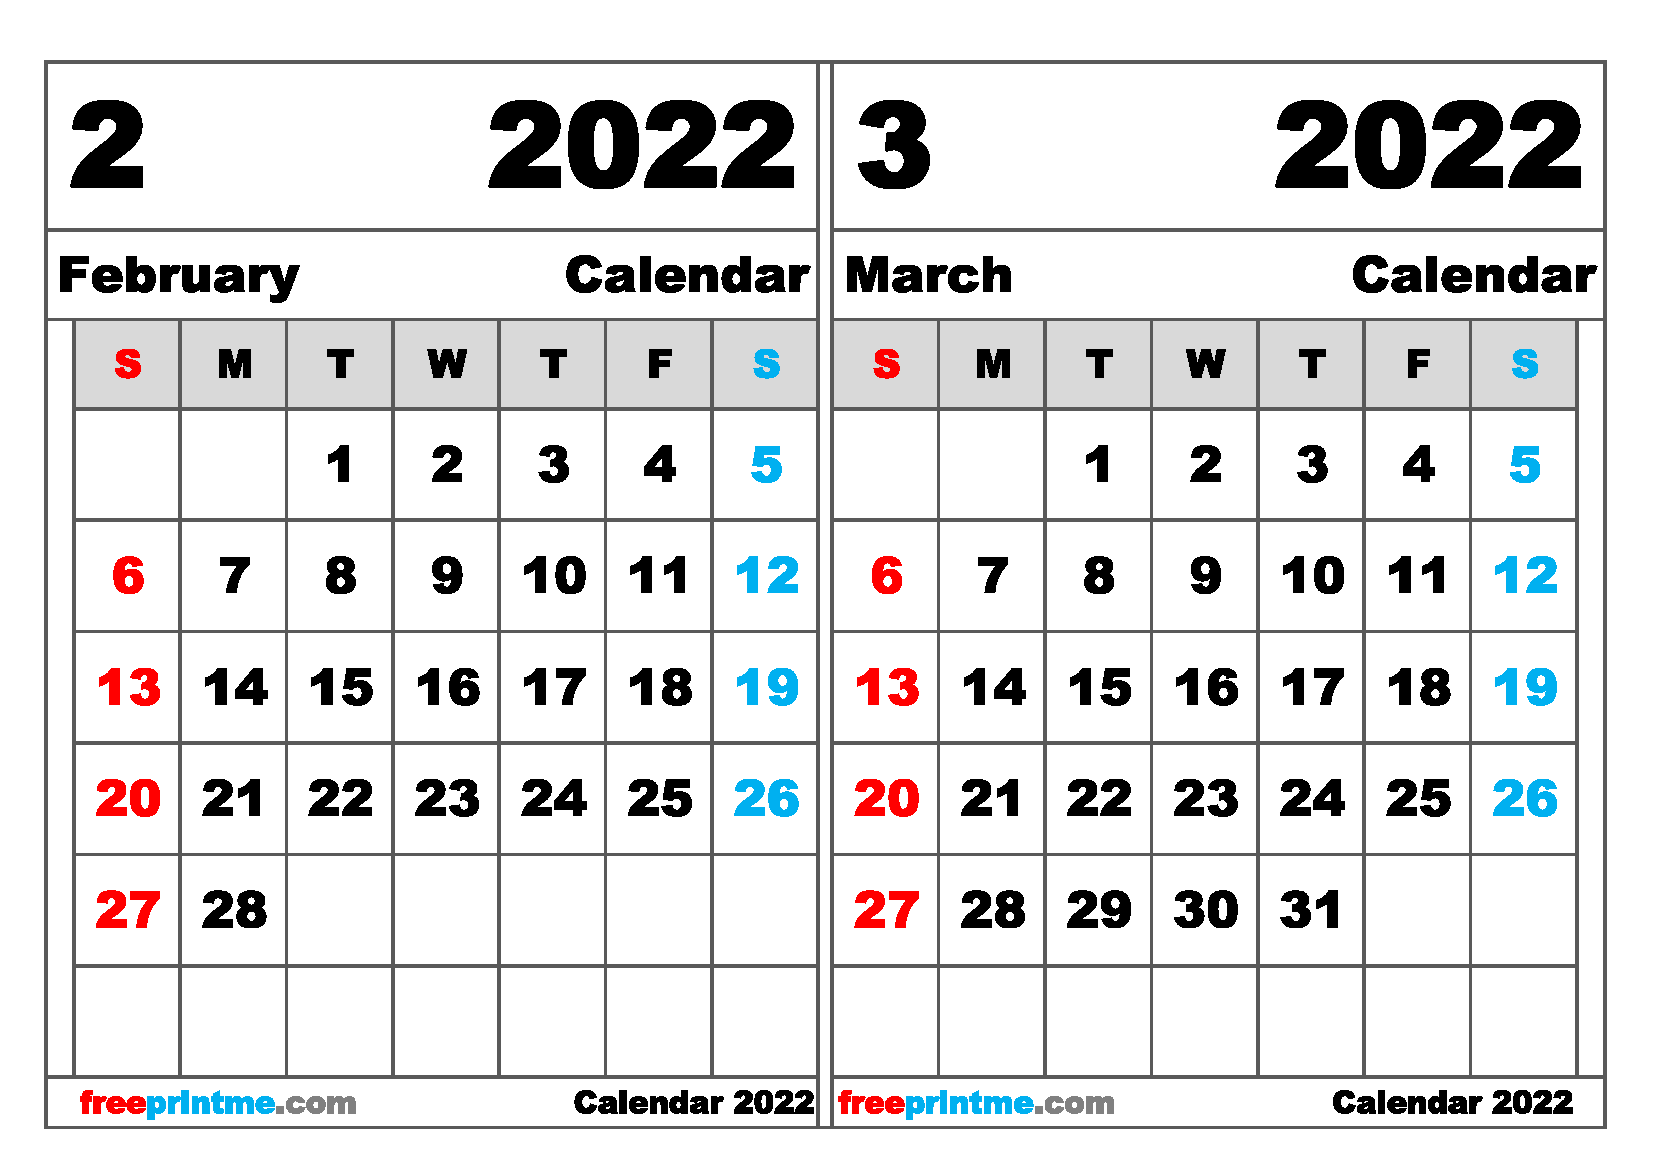 February And March 2022 Calendar Printable Free February March 2022 Calendar Printable Variety Of Sizes